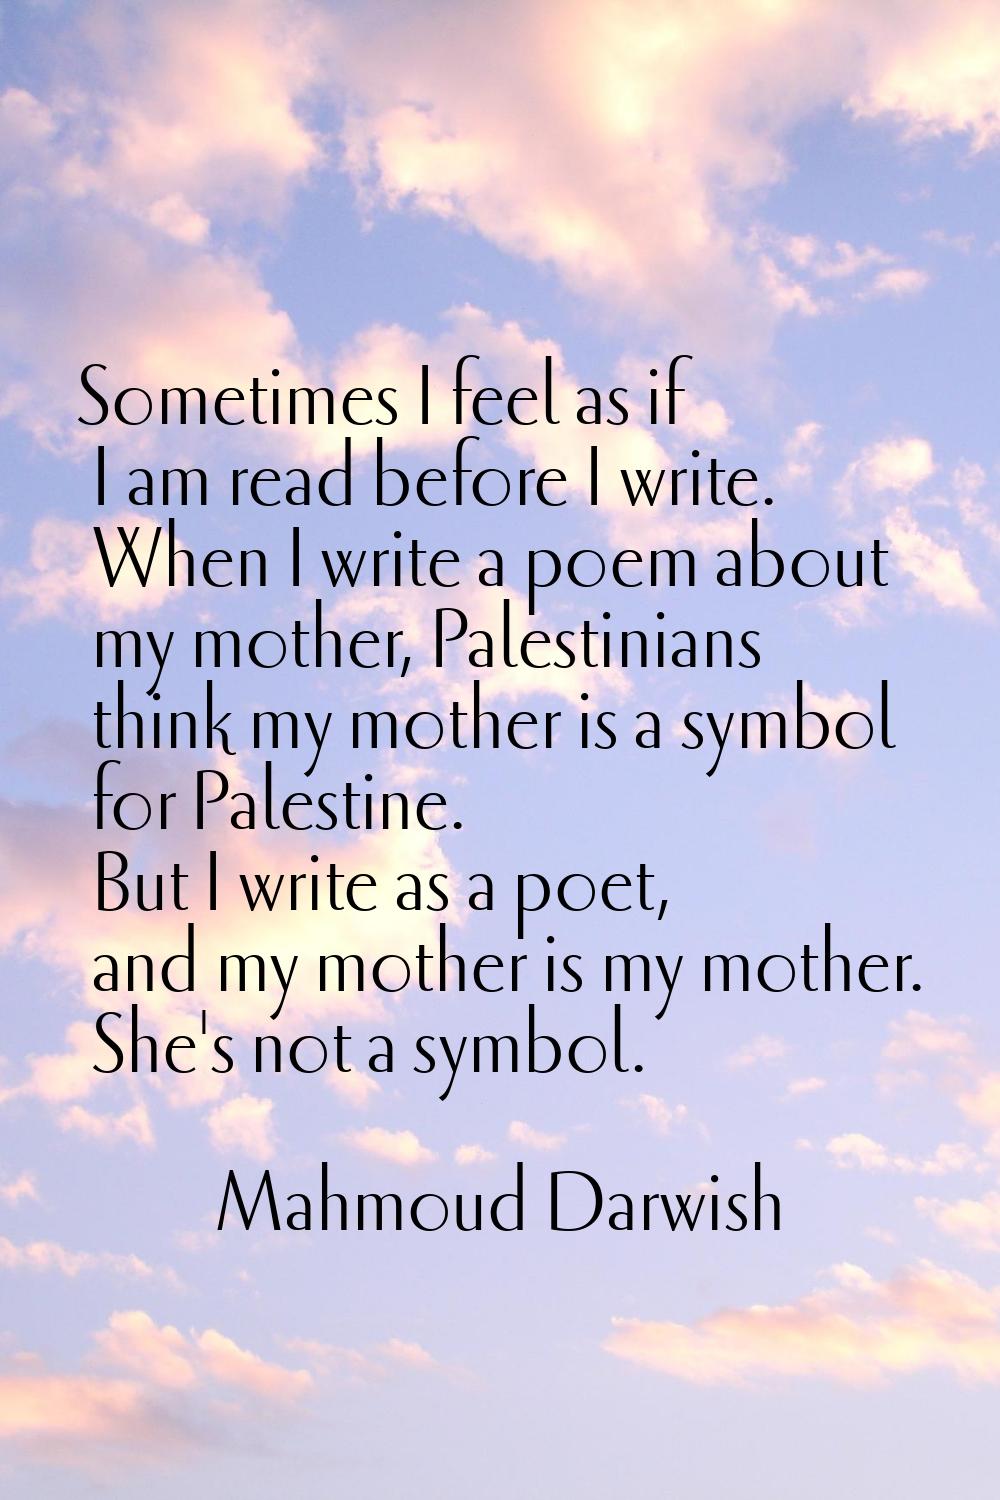 Sometimes I feel as if I am read before I write. When I write a poem about my mother, Palestinians 